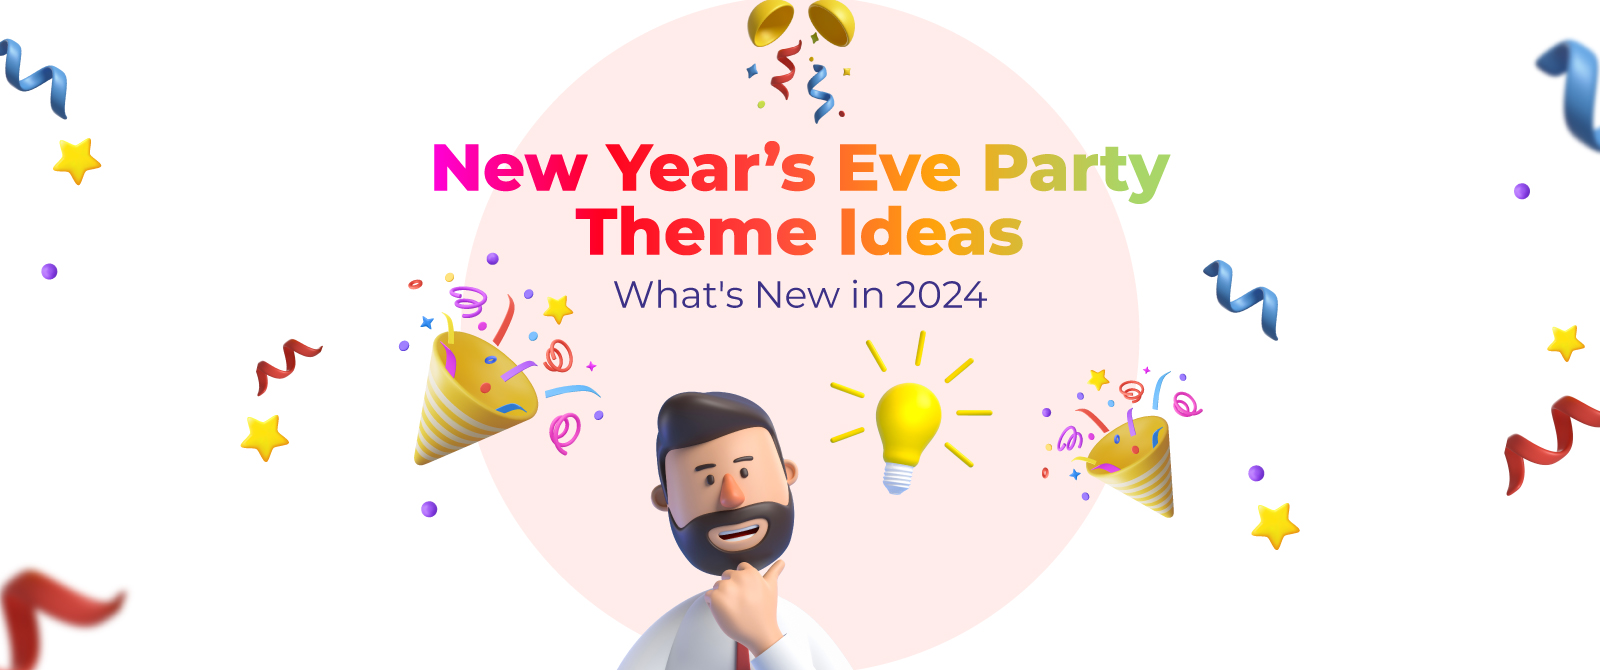 New Year’s Eve Party Theme Ideas: What’s New in 2024